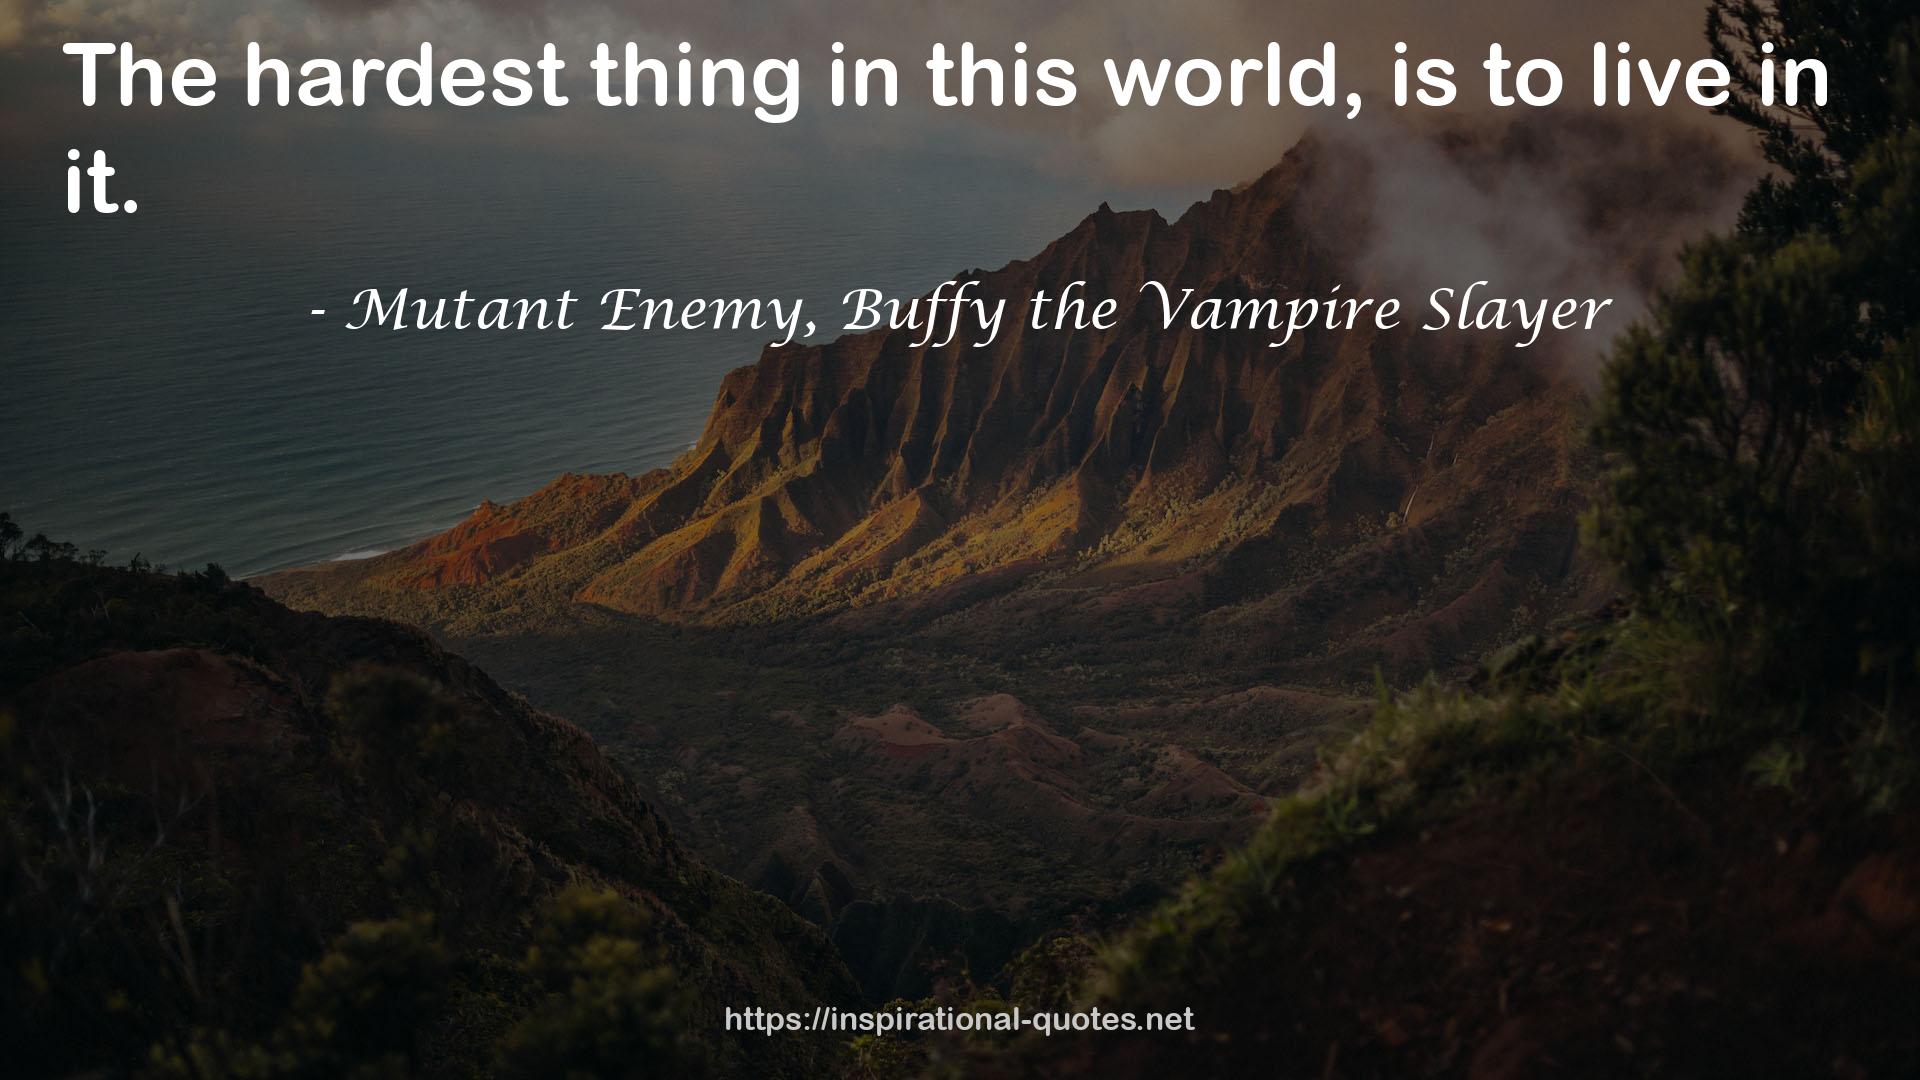 Mutant Enemy, Buffy the Vampire Slayer QUOTES